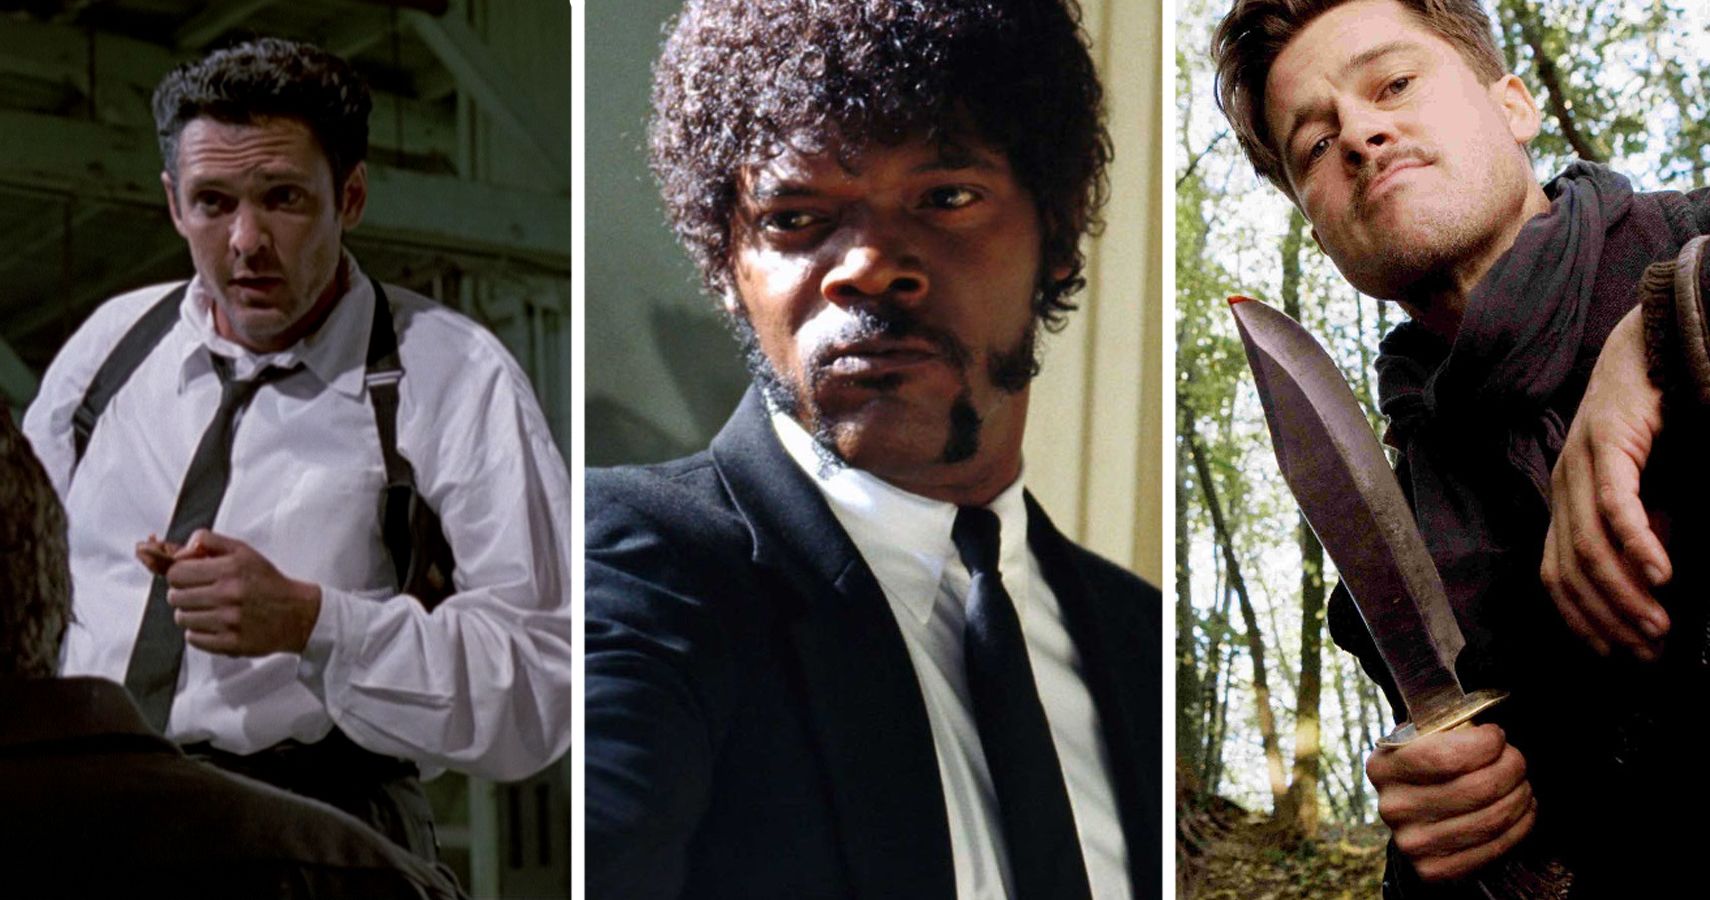 The 10 Most Memorable Quentin Tarantino Characters, Ranked